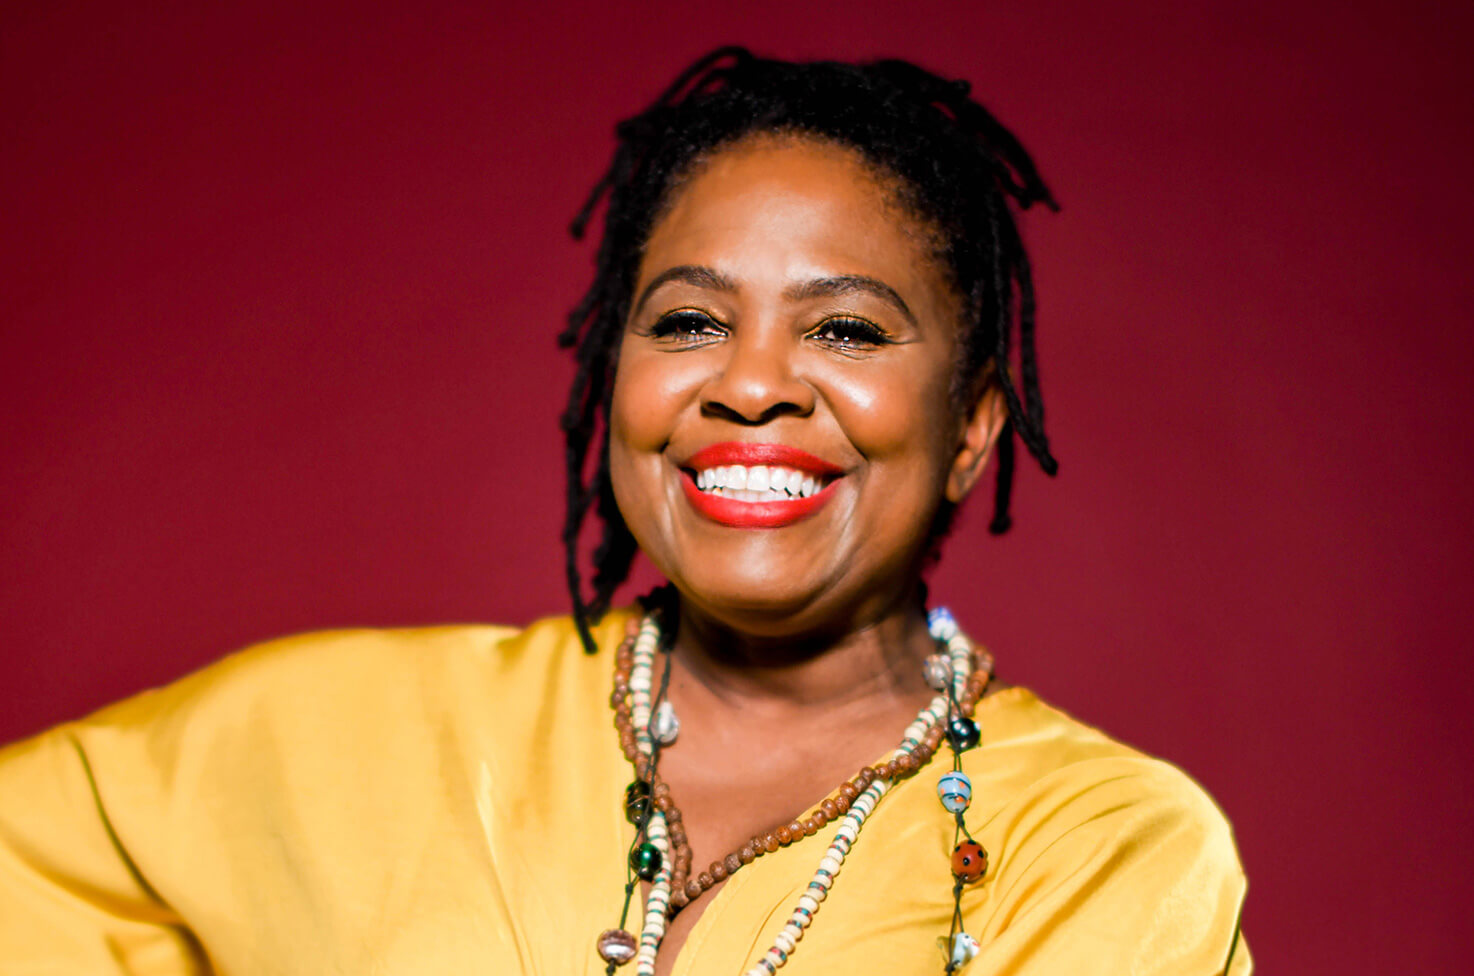 Ruthie Foster smiling